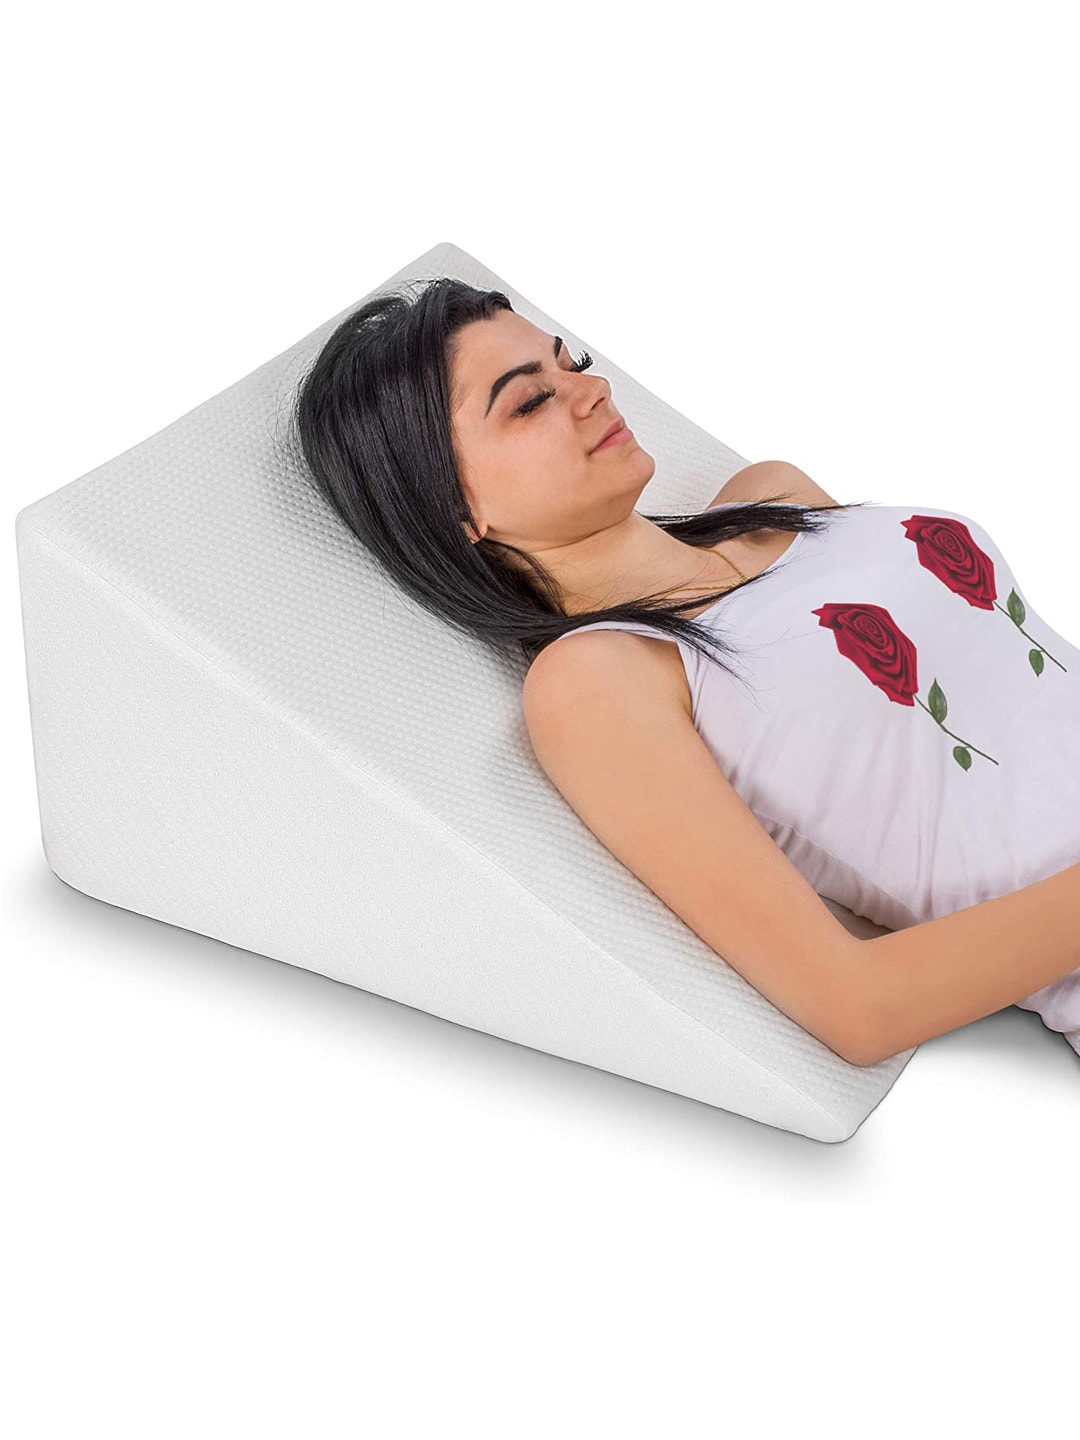 Kuber Industries White Bed Wedge Therapedic Pillow With Memory Foam Price in India